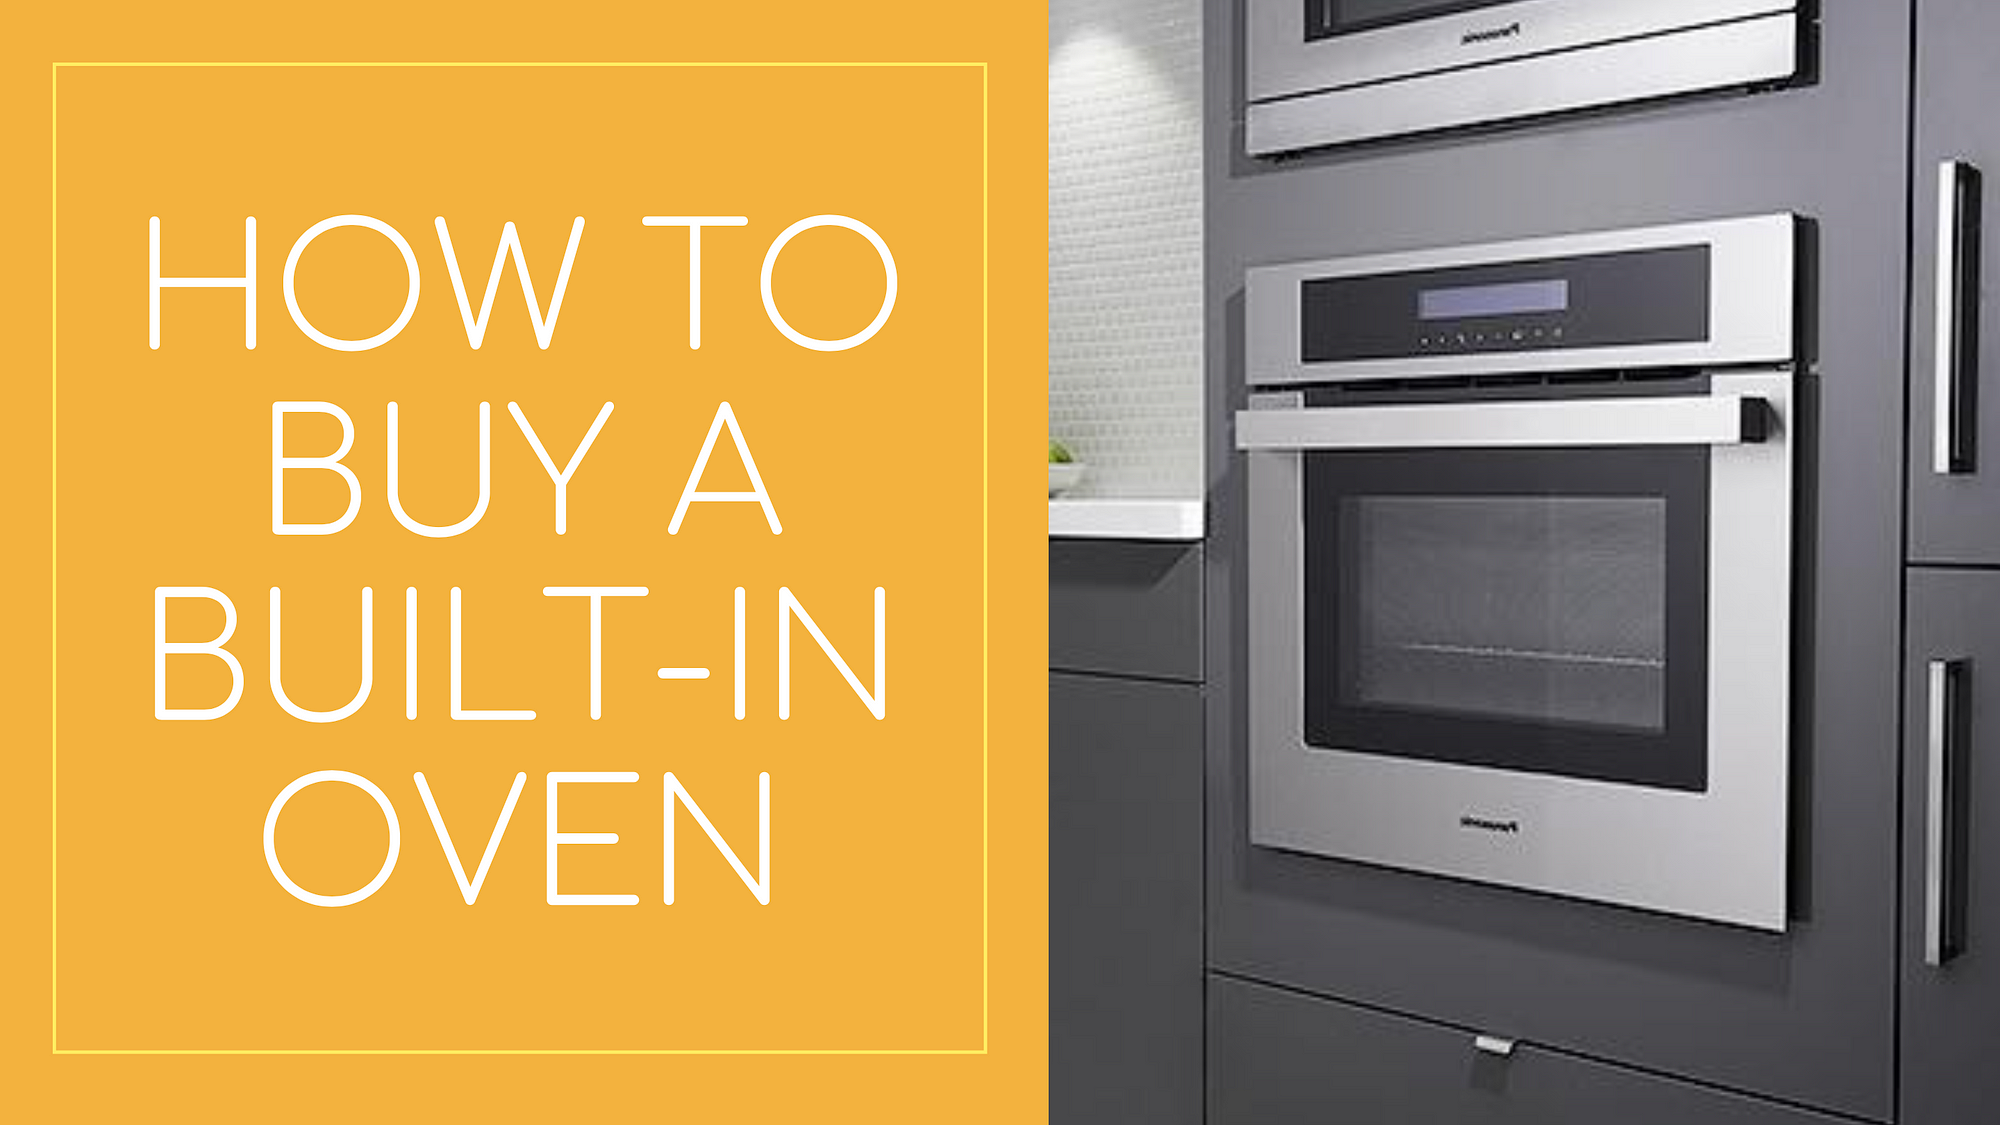 Oven Buying Guide - Kitchen Appliances